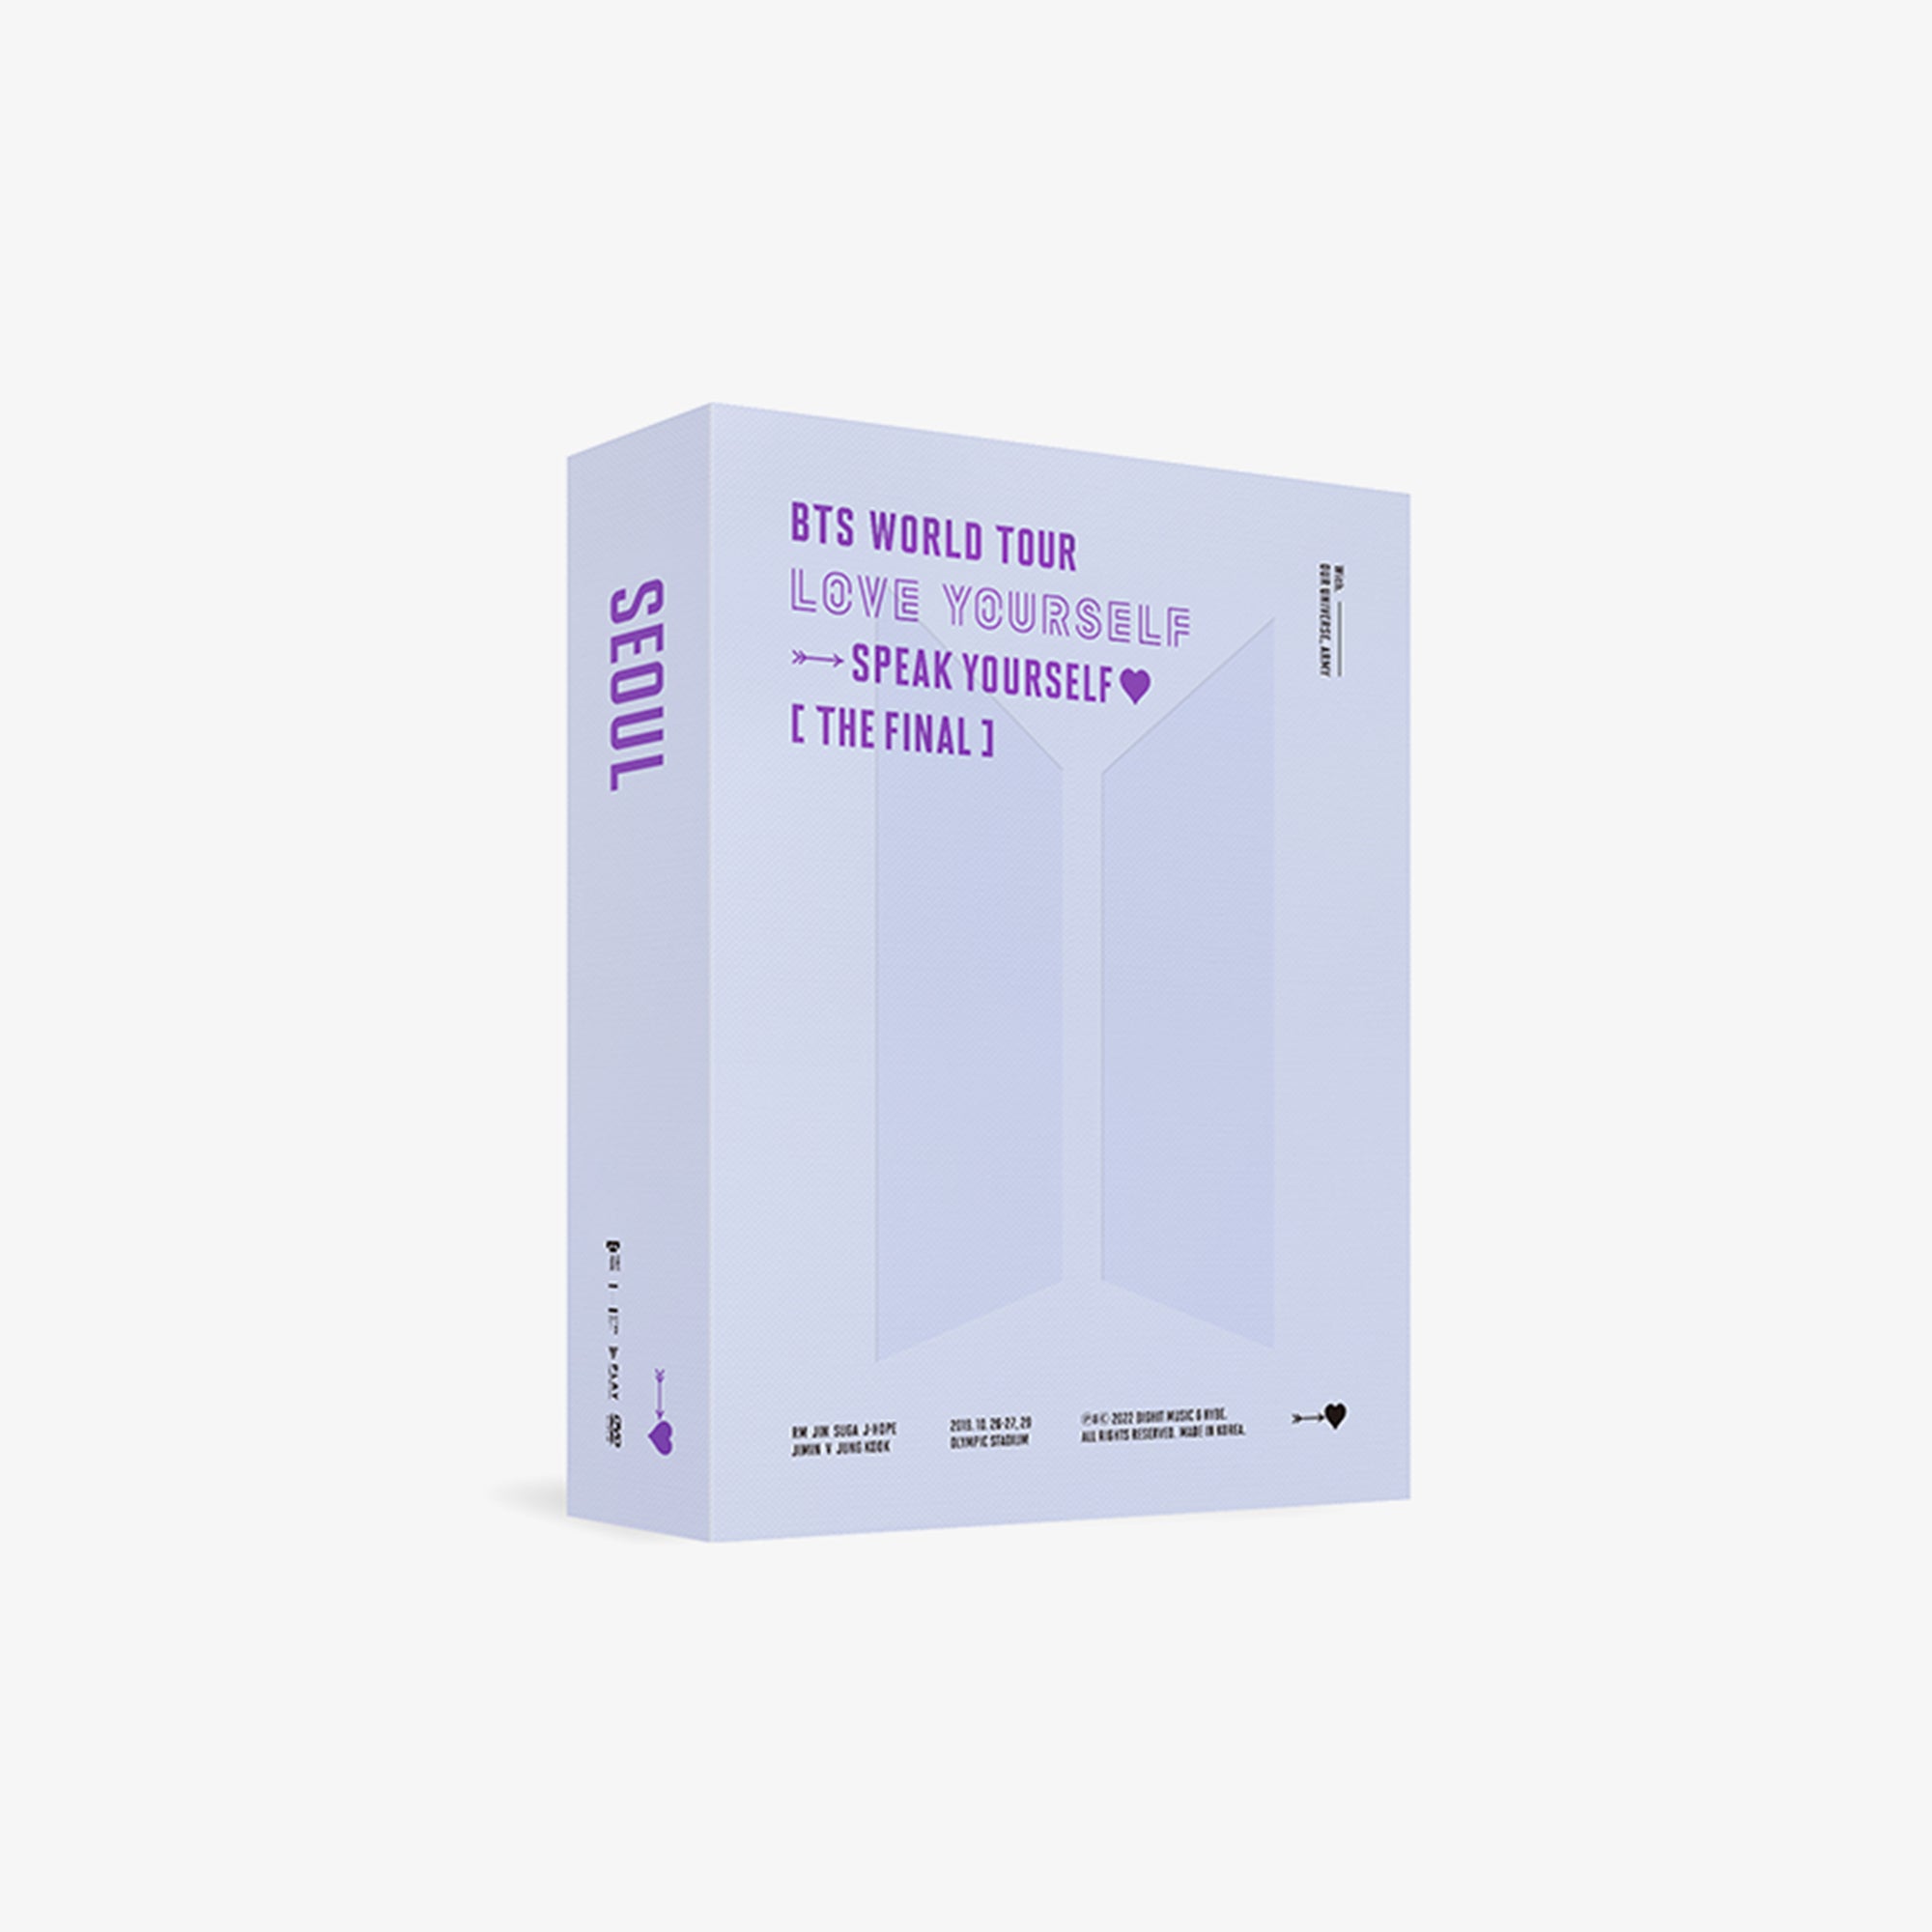 BTS WORLD TOUR LOVE YOURSELF 'SPEAK YOURSELF♥' [THE FINAL] (DVD) COVER